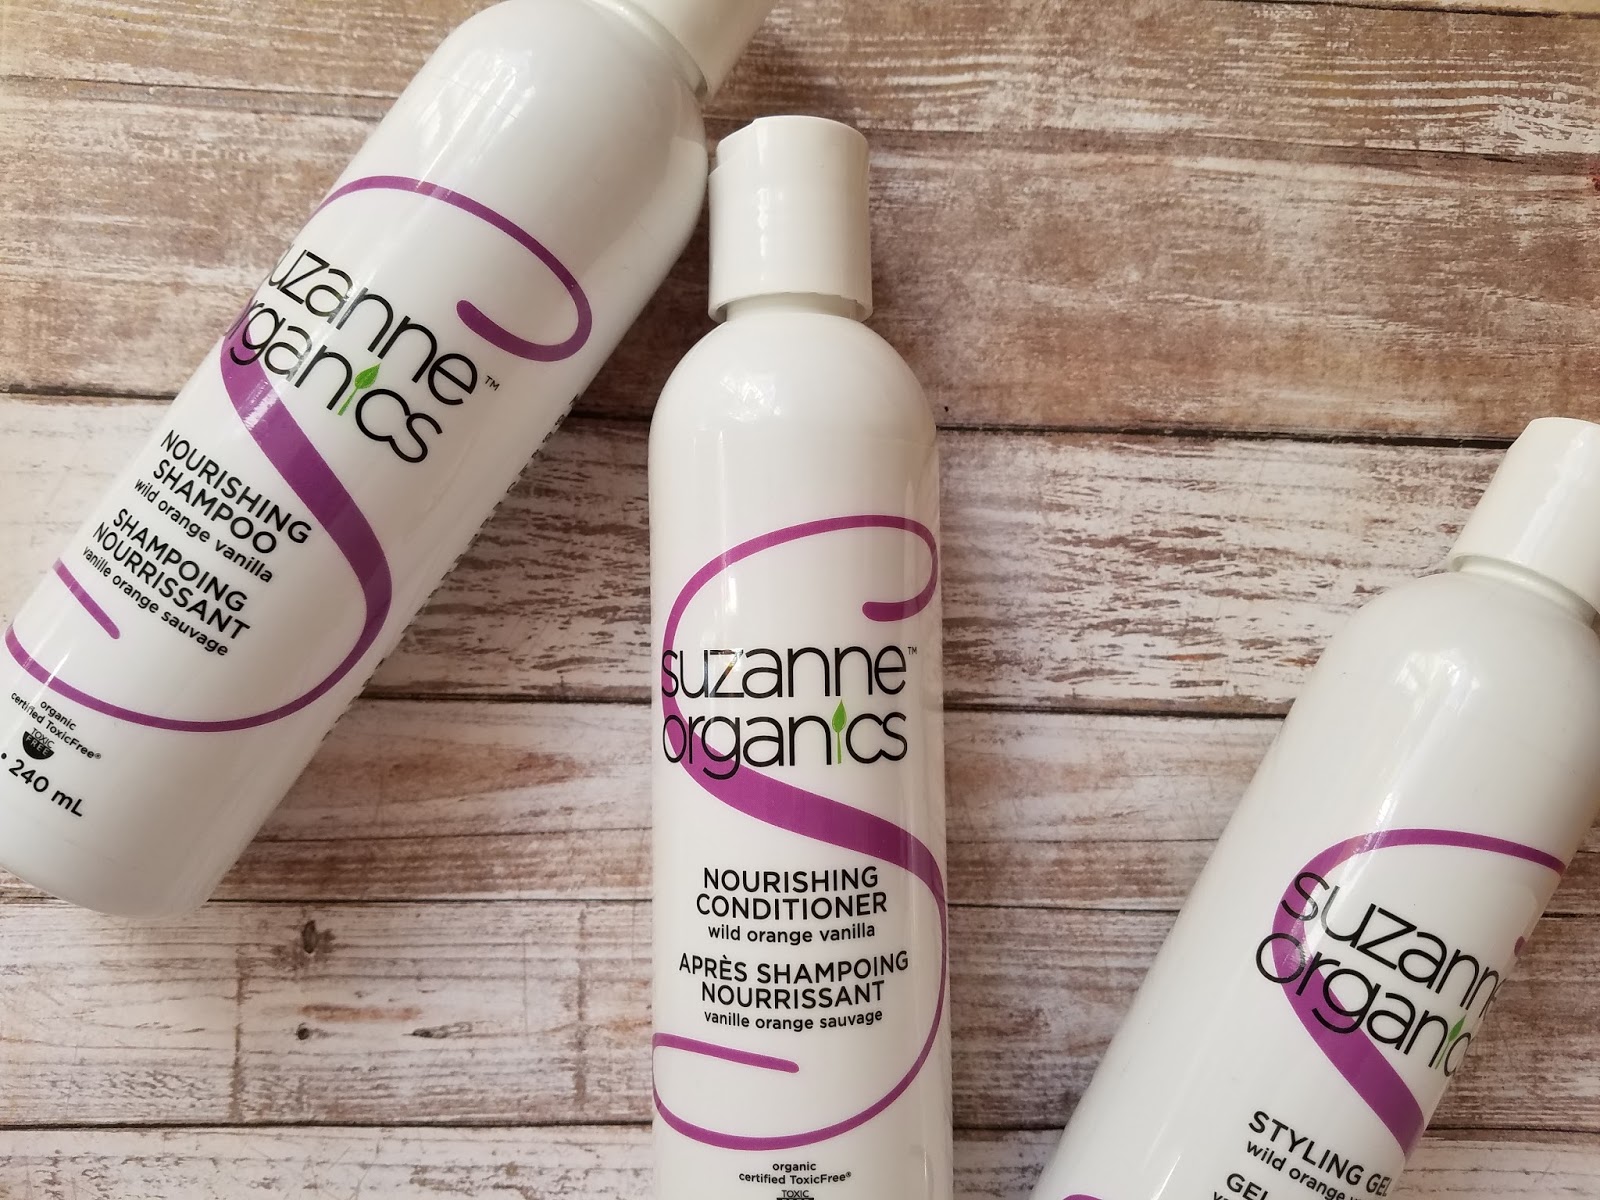 How to up your beauty game with SUZANNE Organics